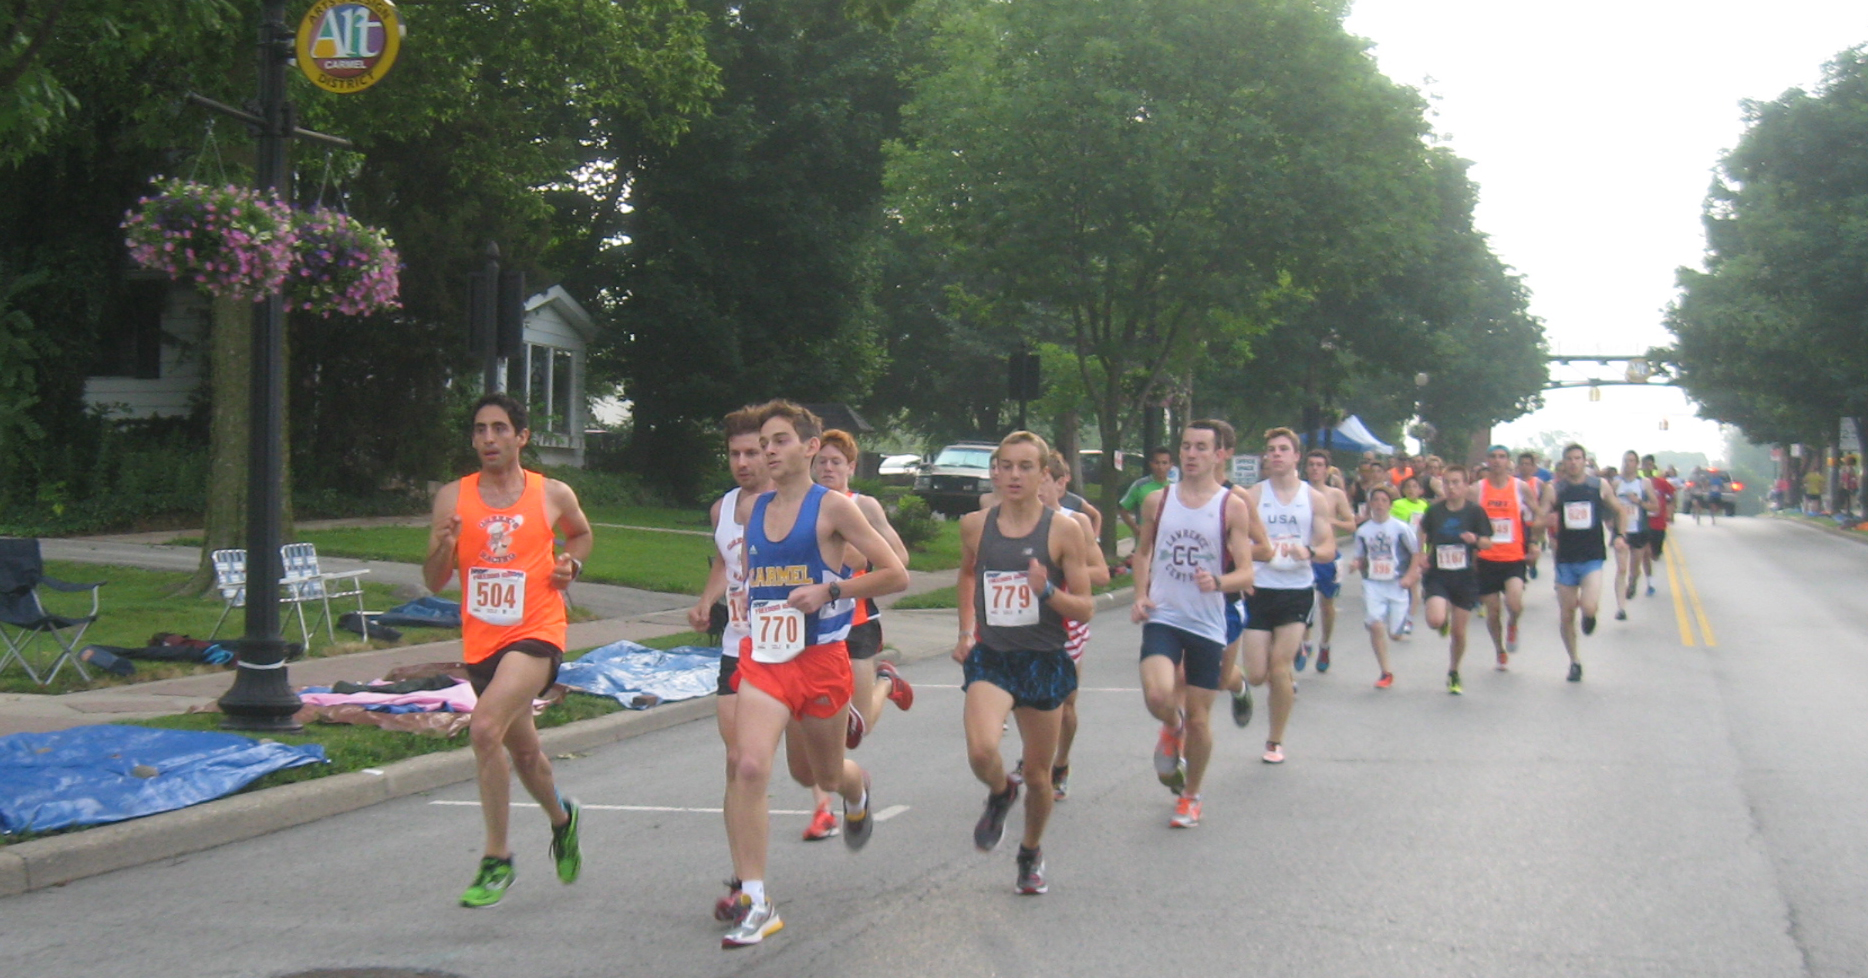 Freedom Run participants run near the Carmel Arts & Design District. (Submitted photo)